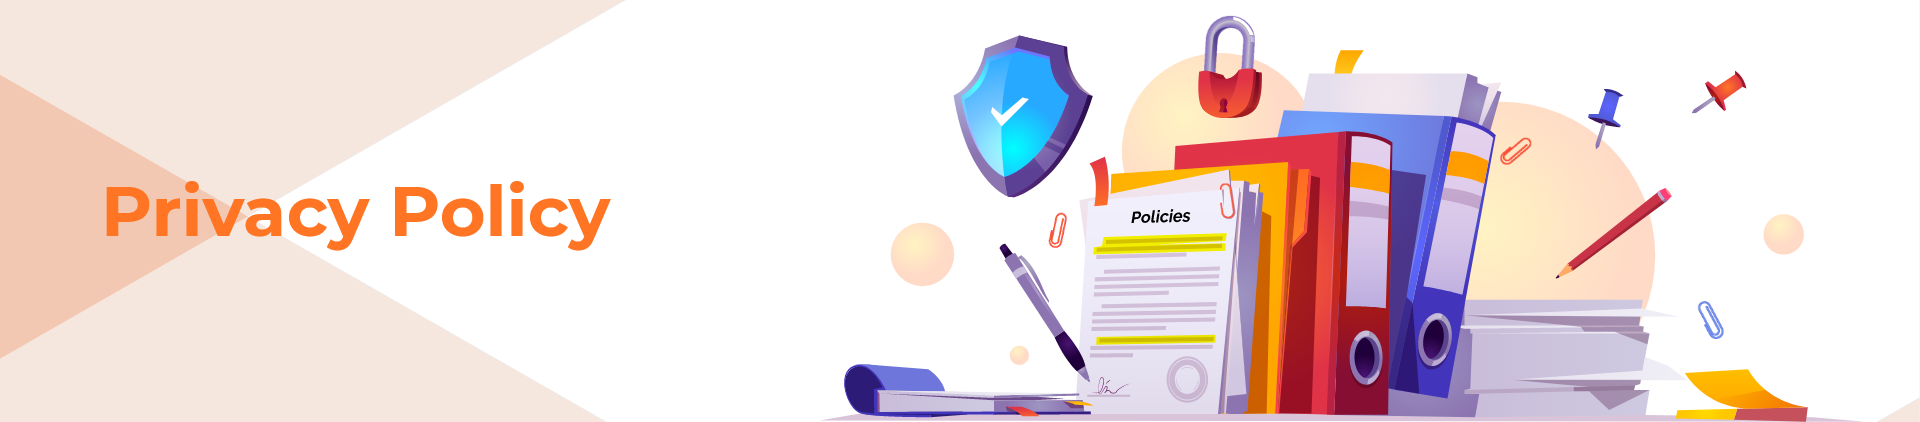 Privacy policy main banner